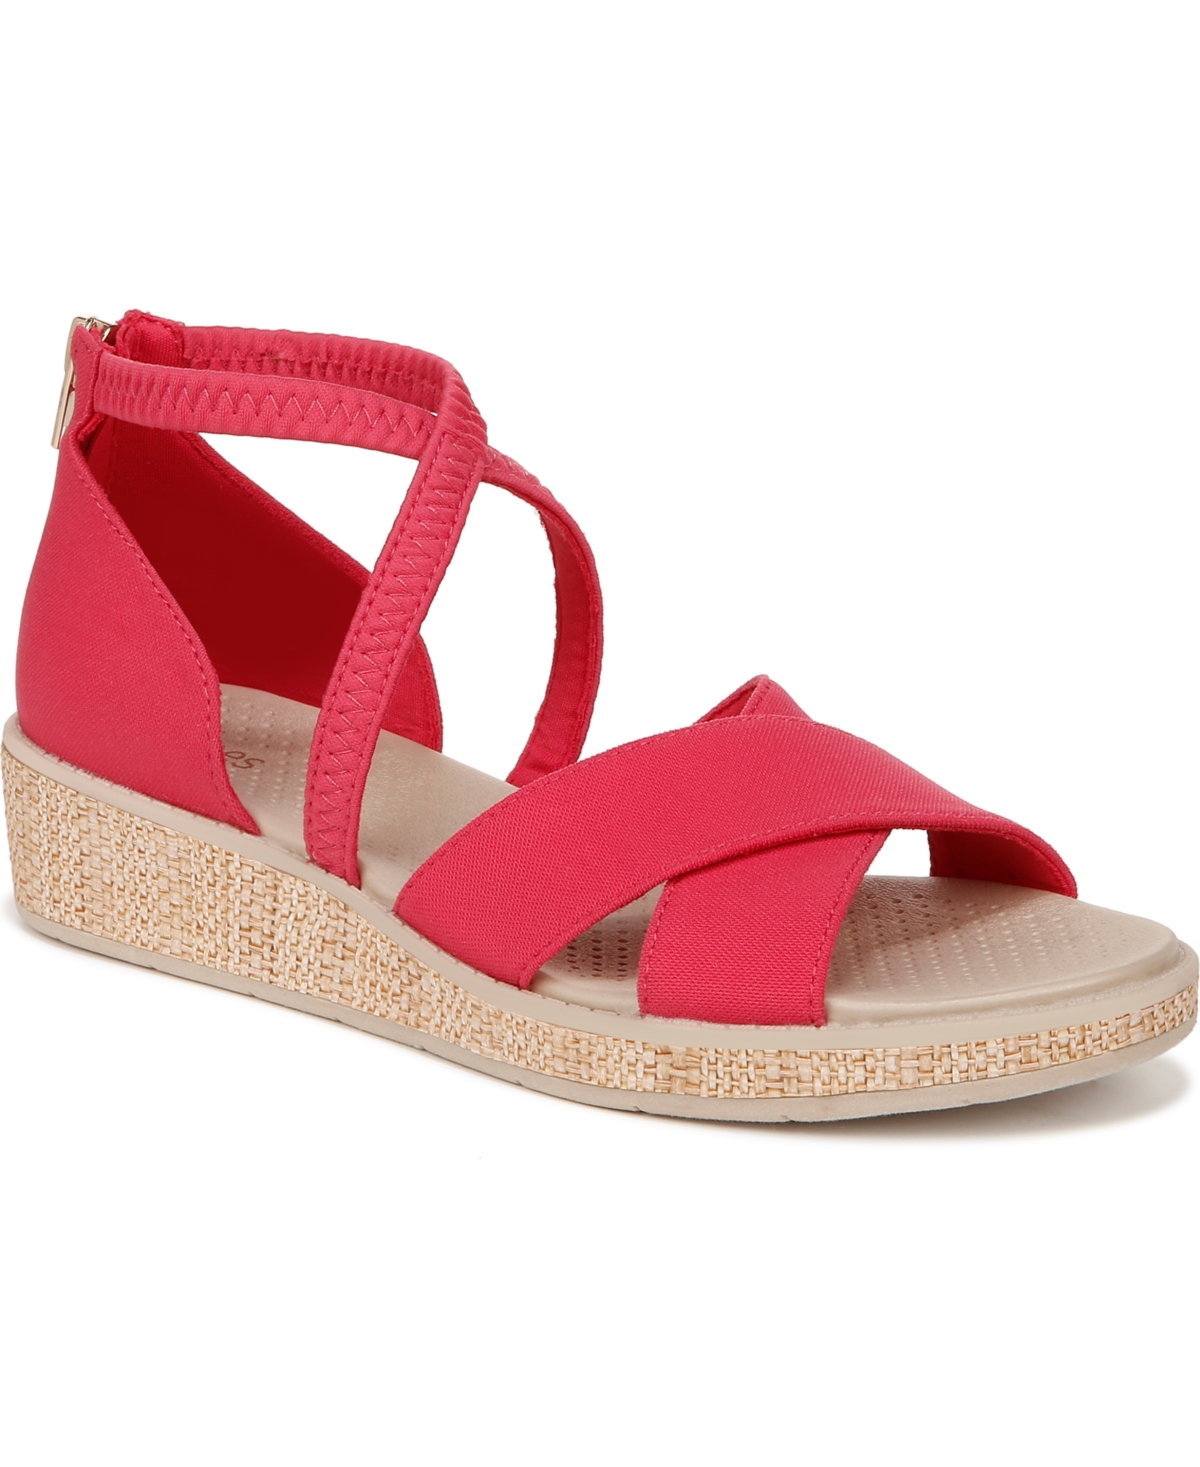 Bali Sand Washable Strappy Sandals - Magenta Pink Fabric